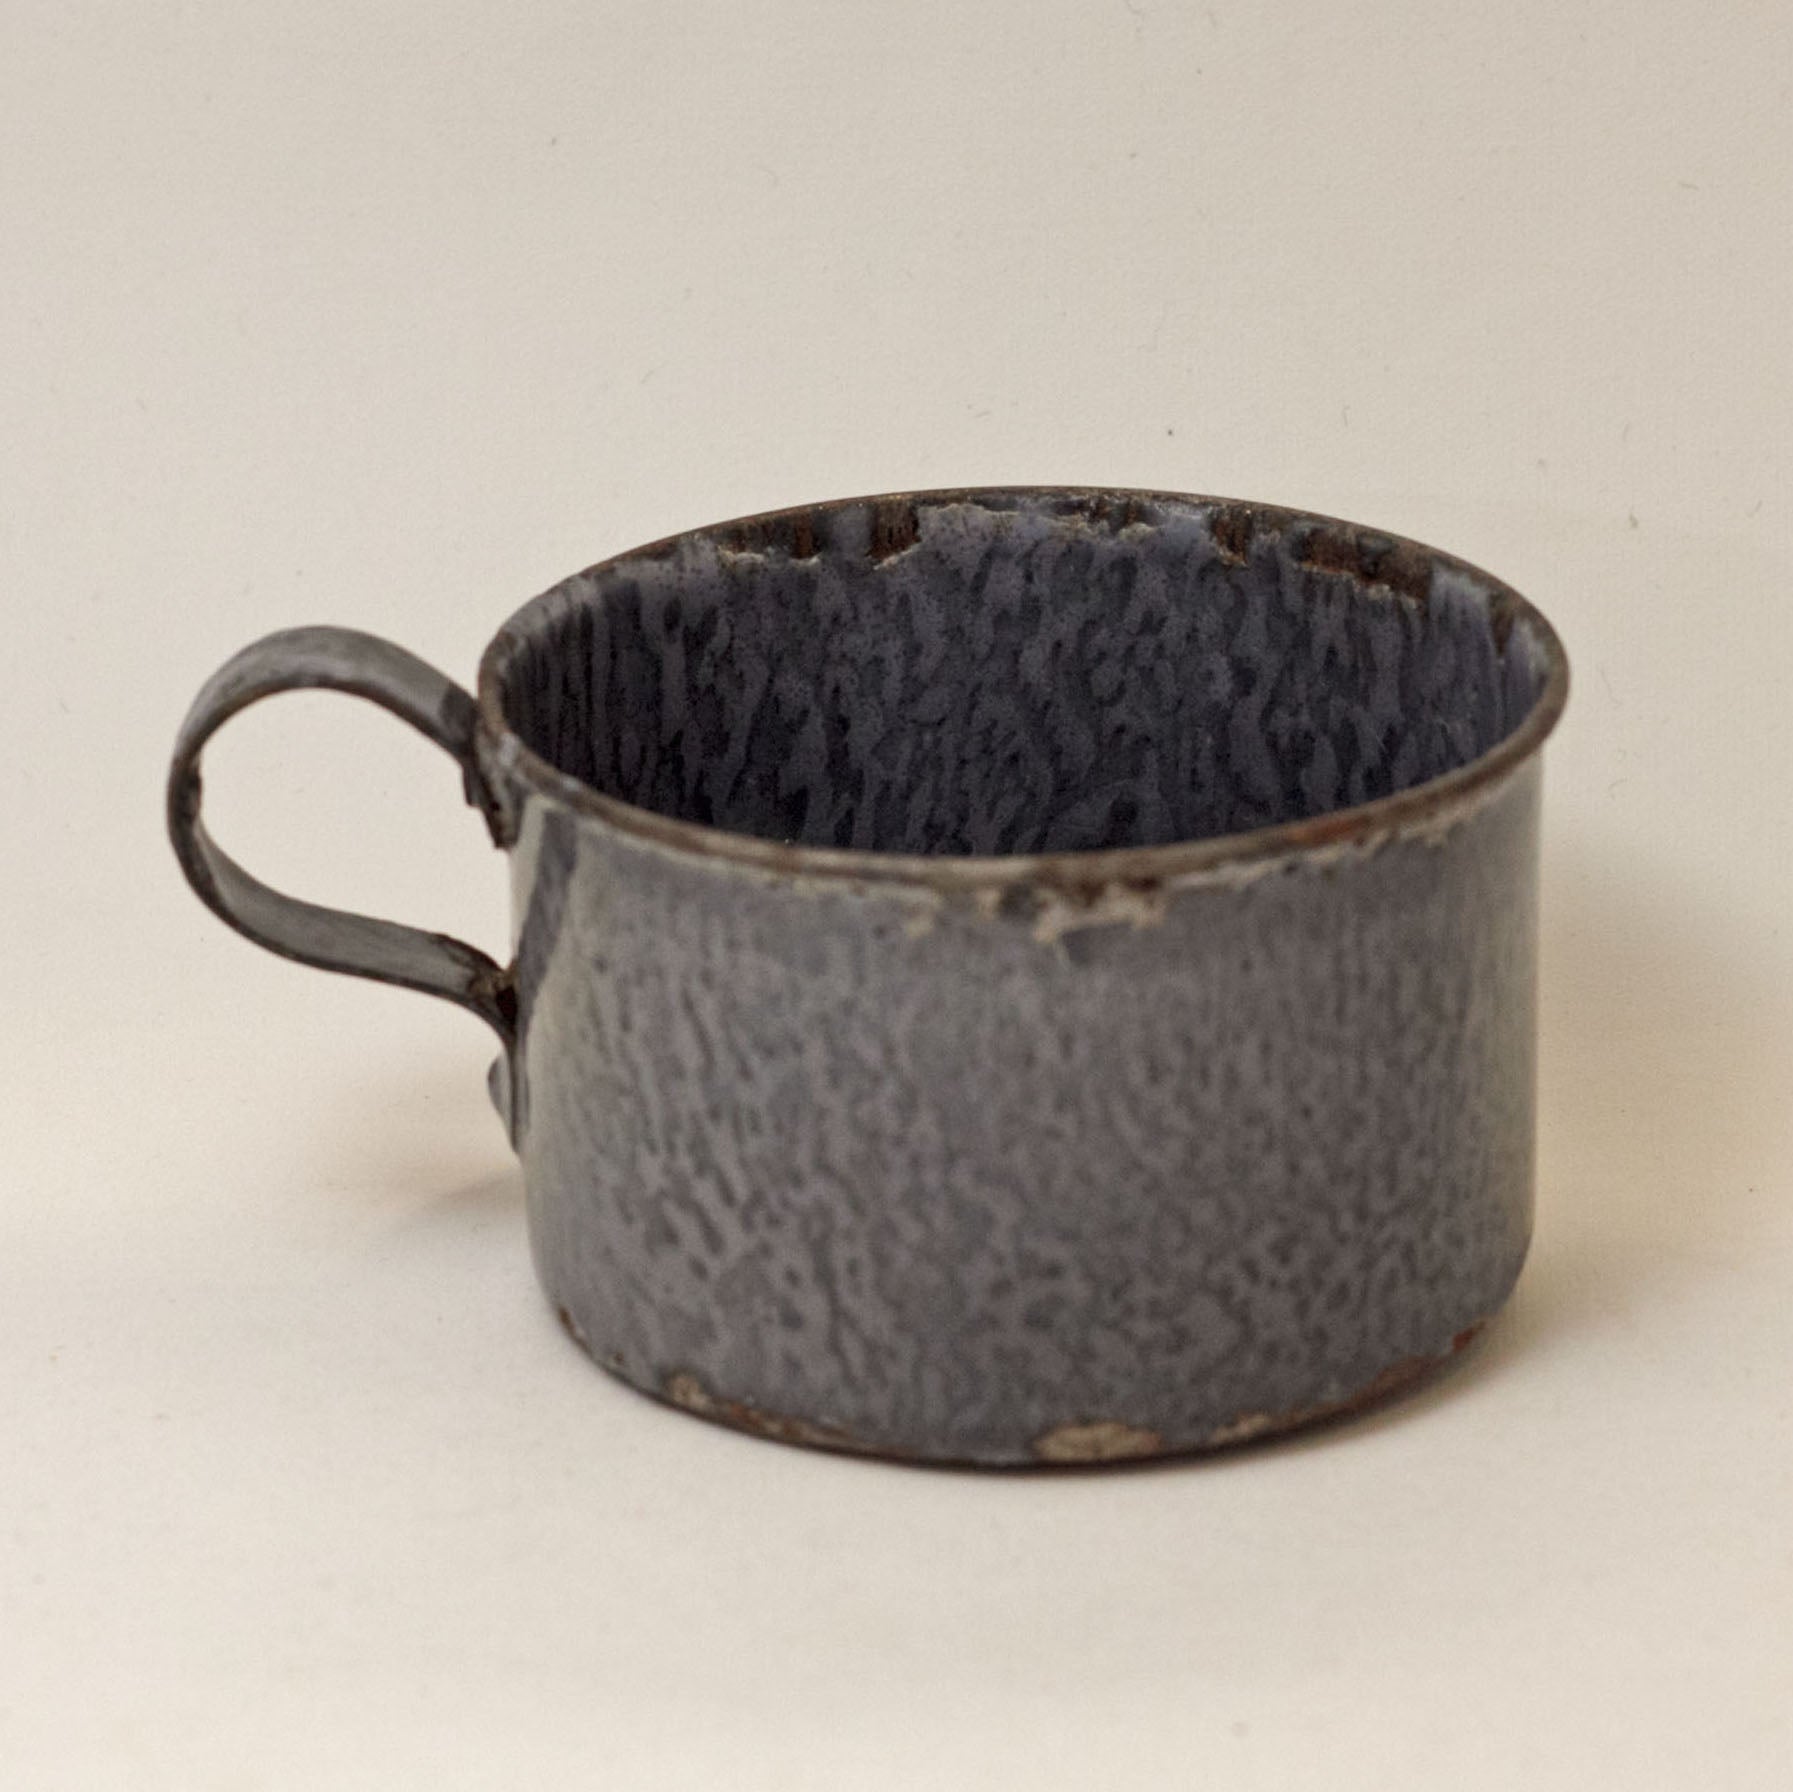 GRANITE WARE CHILD'S CUP with Mottled Gray Enamel